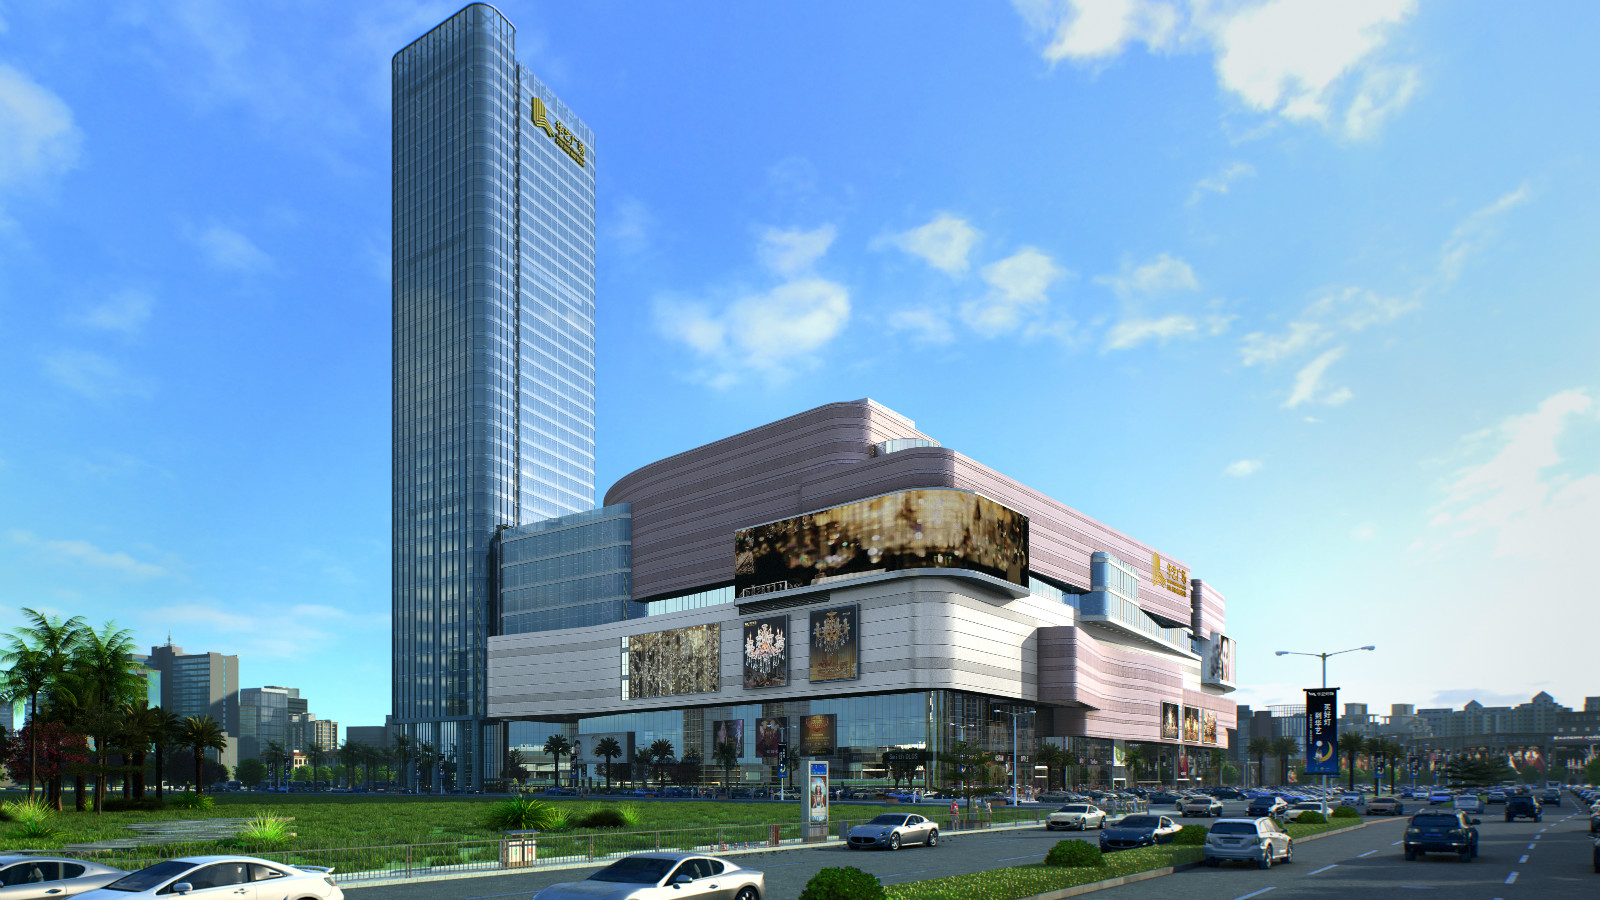 Huayi Plaza: One of the sub-venues of GILF to create diversified full-style exhibition halls